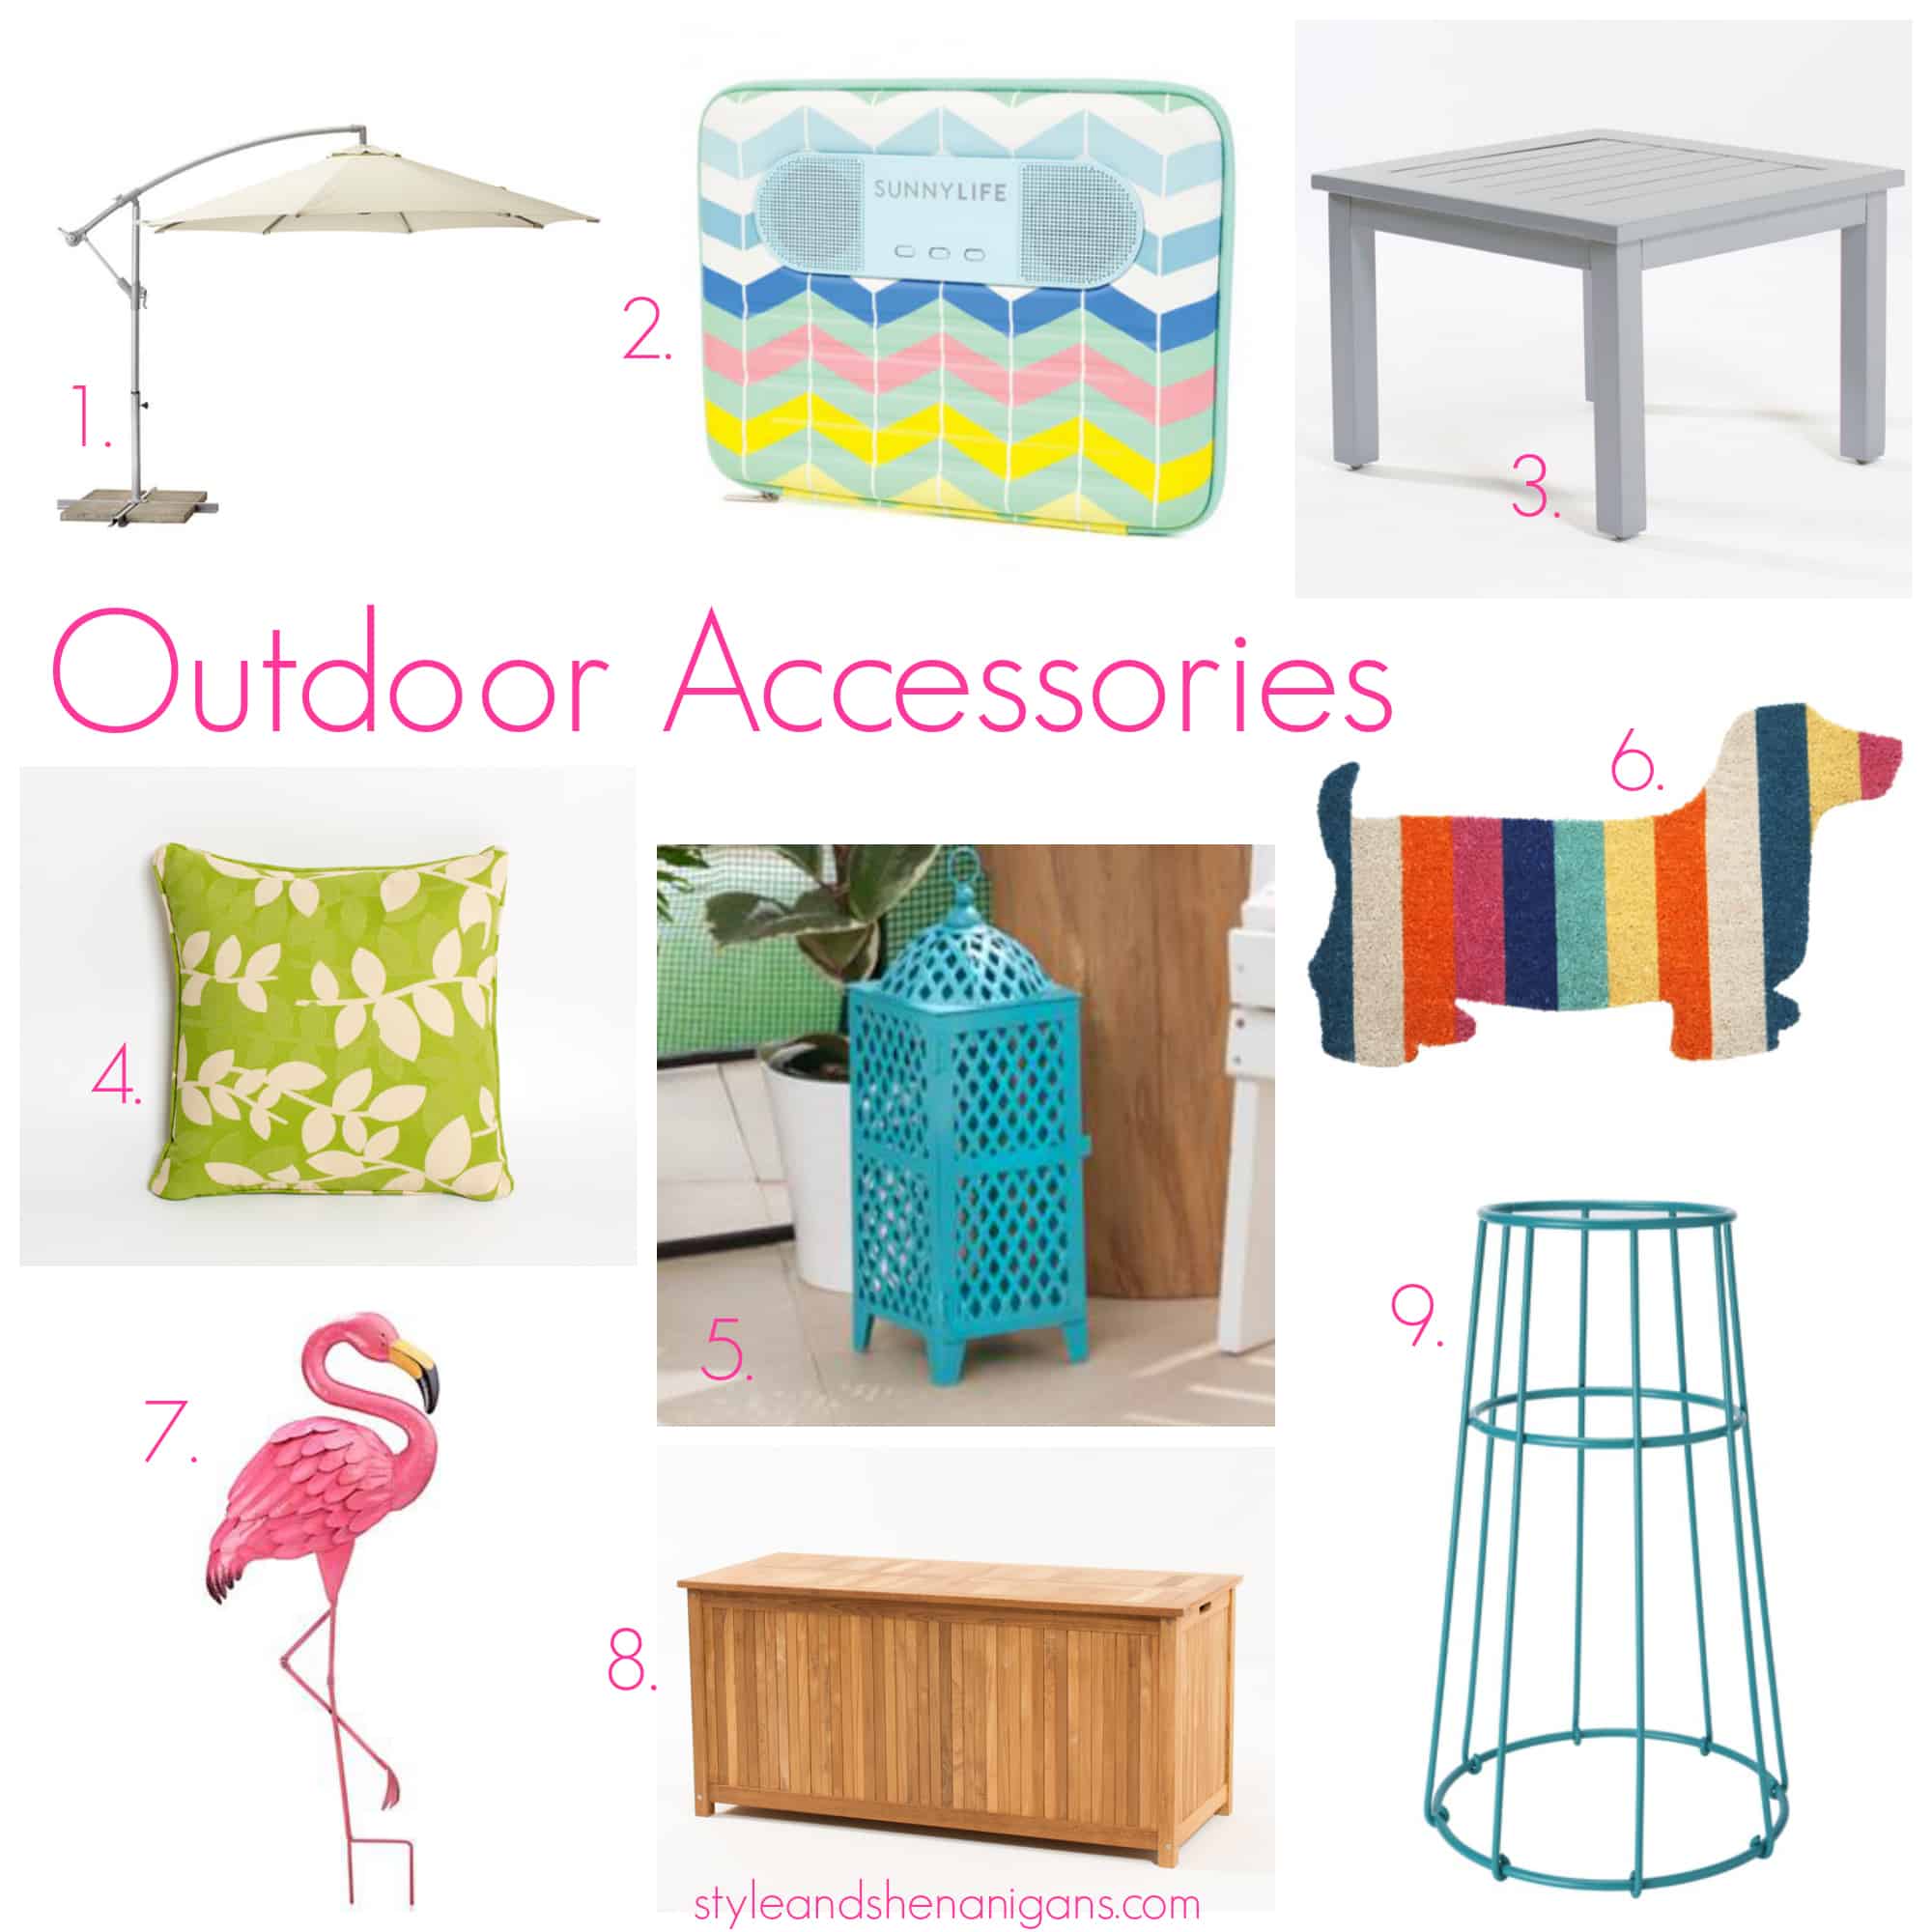 Where to Find the Best Deals on Outdoor Home Furnishings